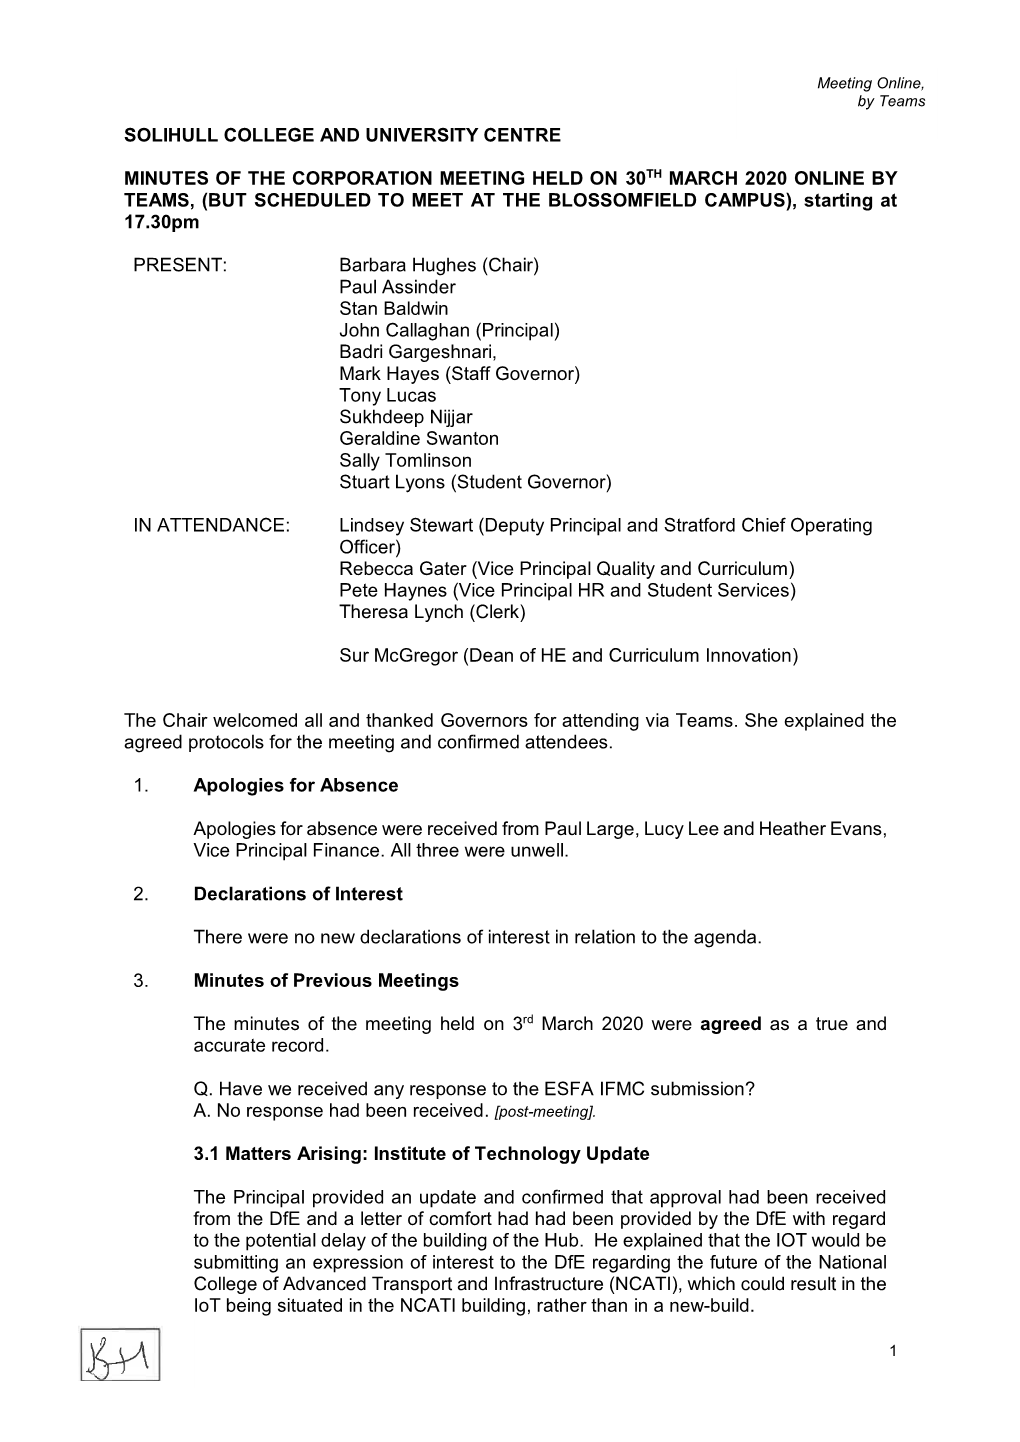 Corporation Meeting Minutes 30 March 2020